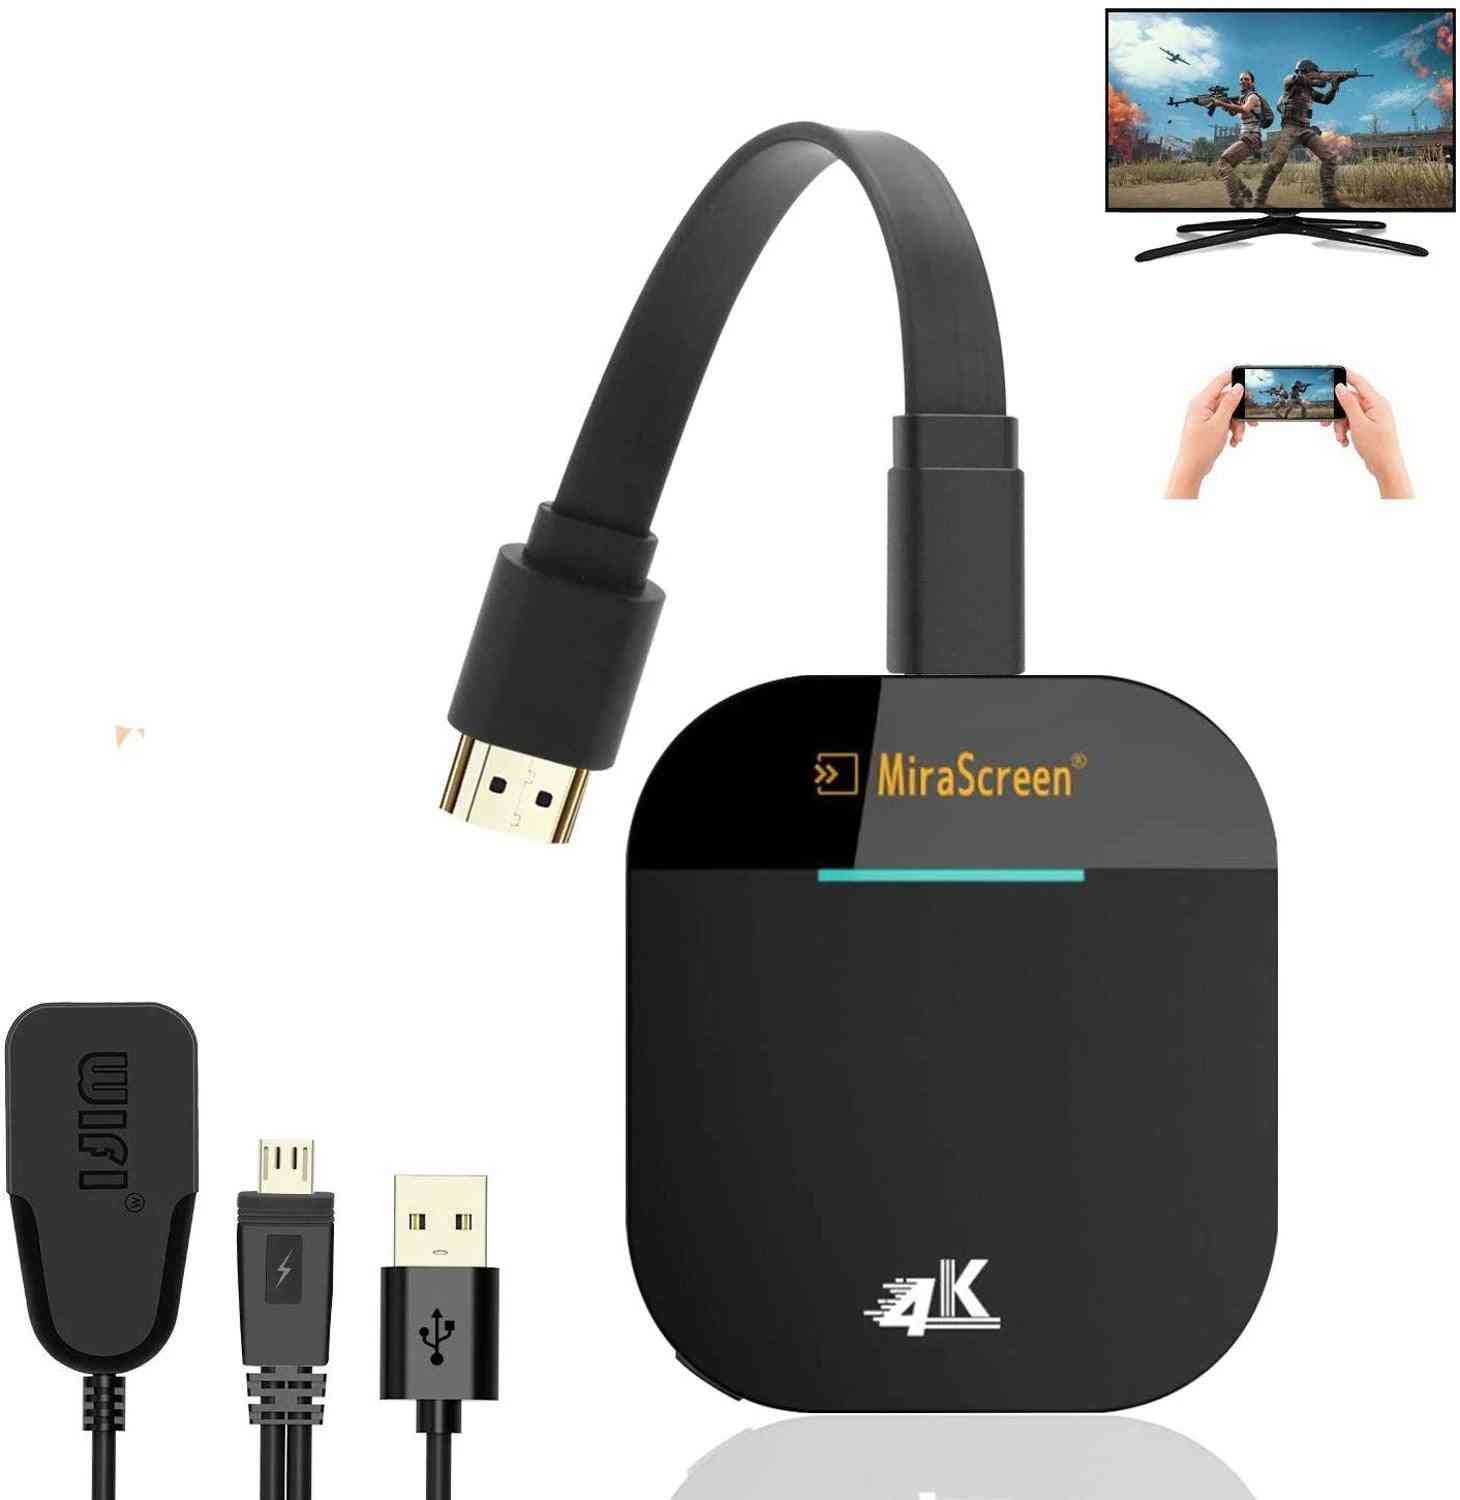 Wireless Hdmi, Dongle Tv Stick Miracast, Airplay Receiver, Mirror Screen